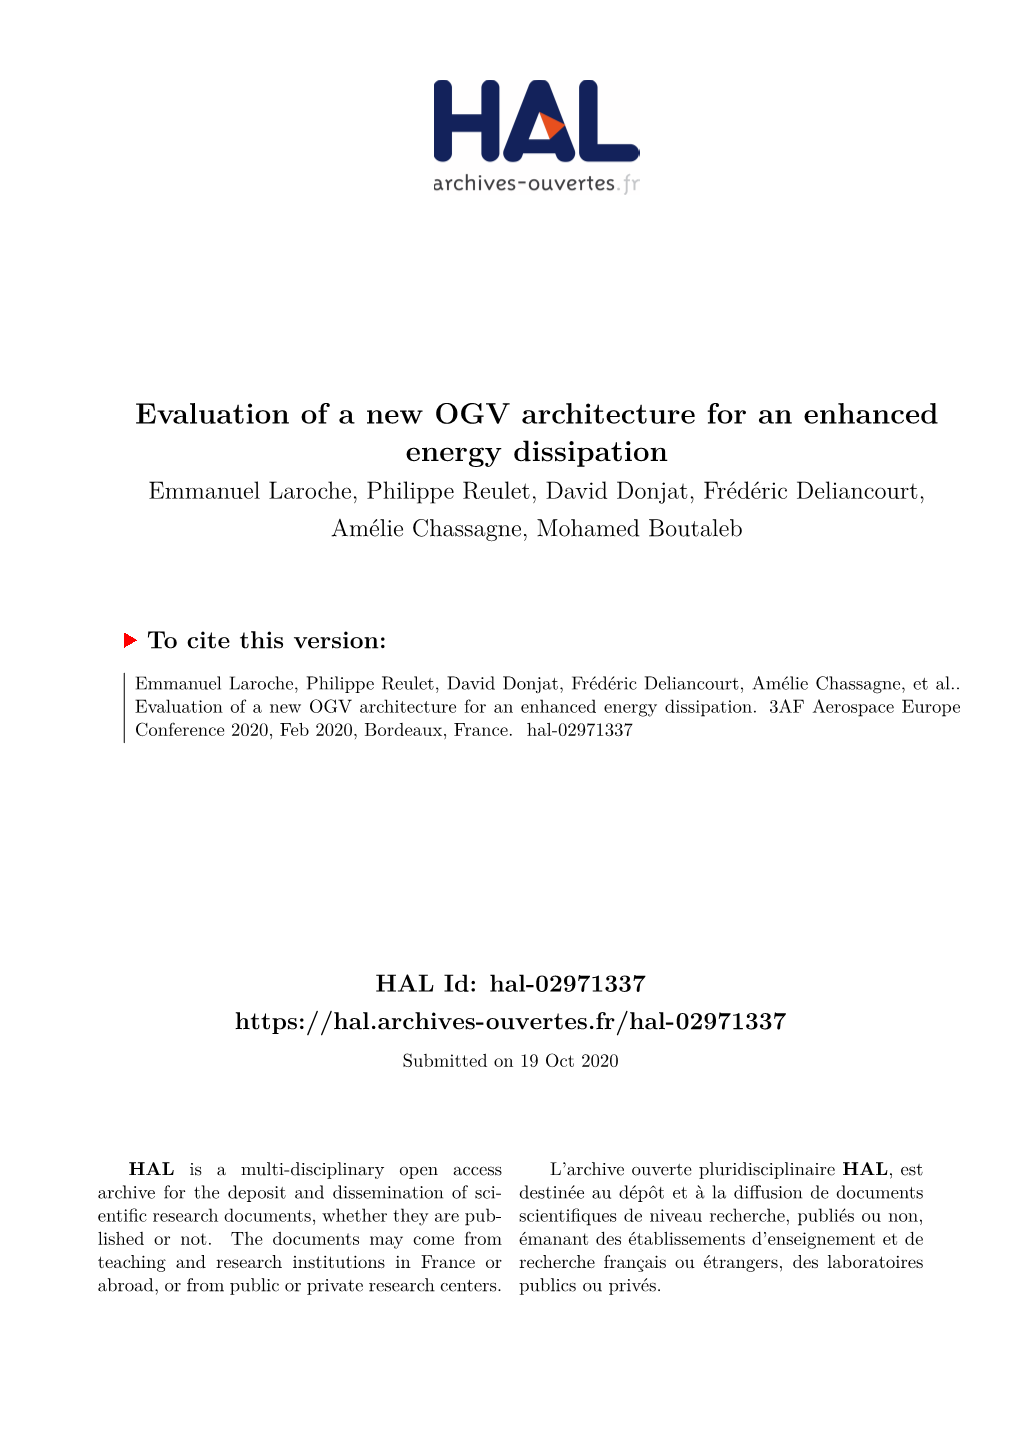 Evaluation of a New OGV Architecture for an Enhanced Energy Dissipation